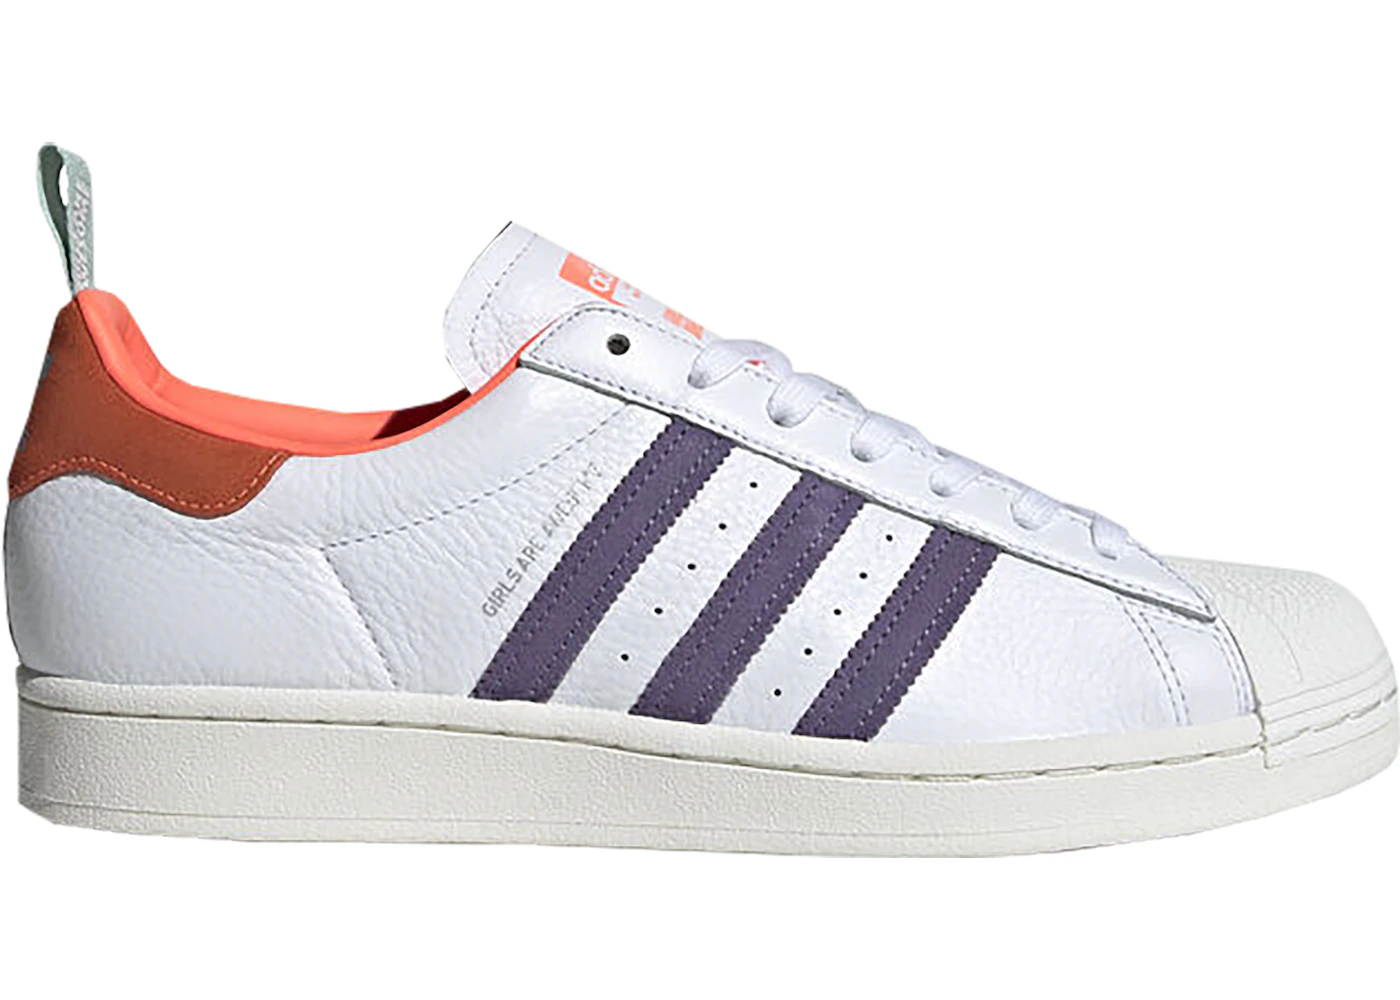 adidas Superstar Girls Are Awesome (Women's) - FW8087 - US